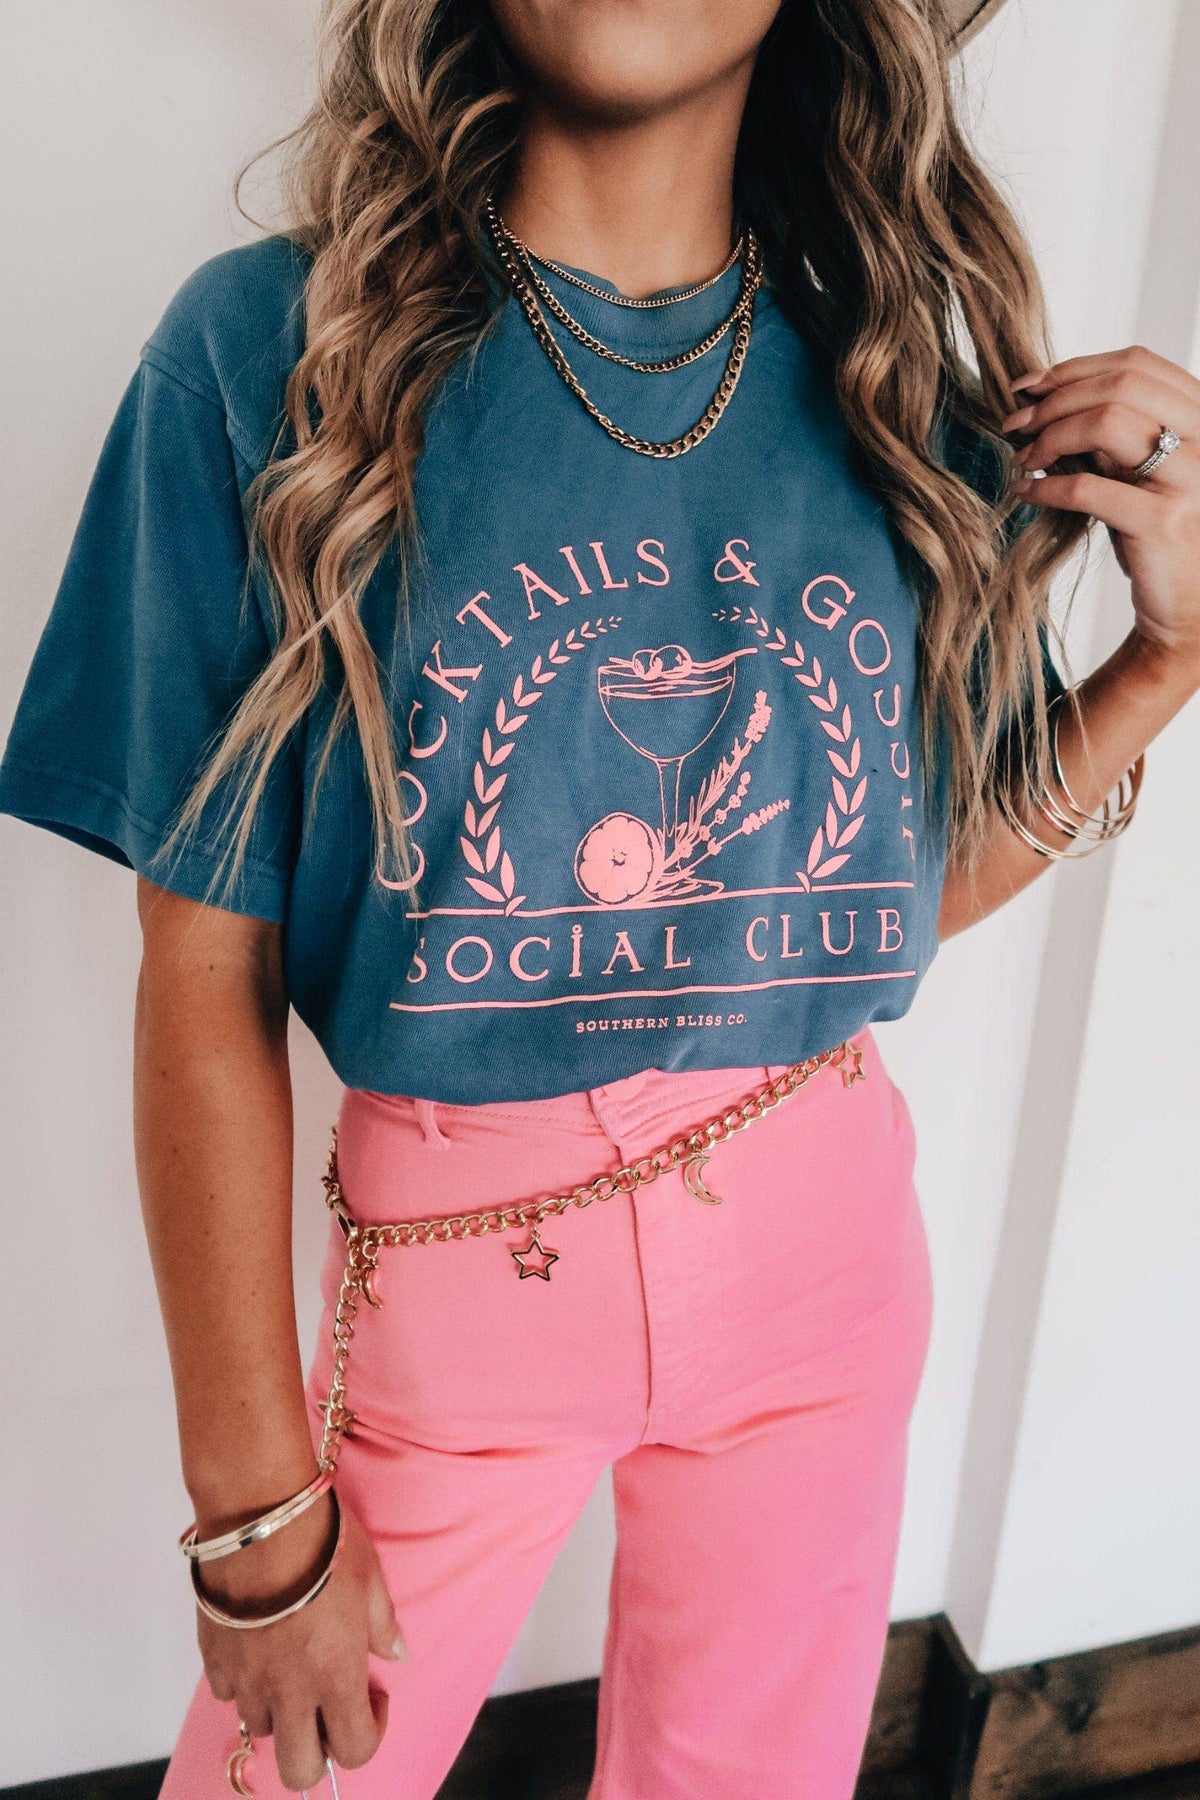 Cocktails and Gossip Social Club Navy Mock Tee